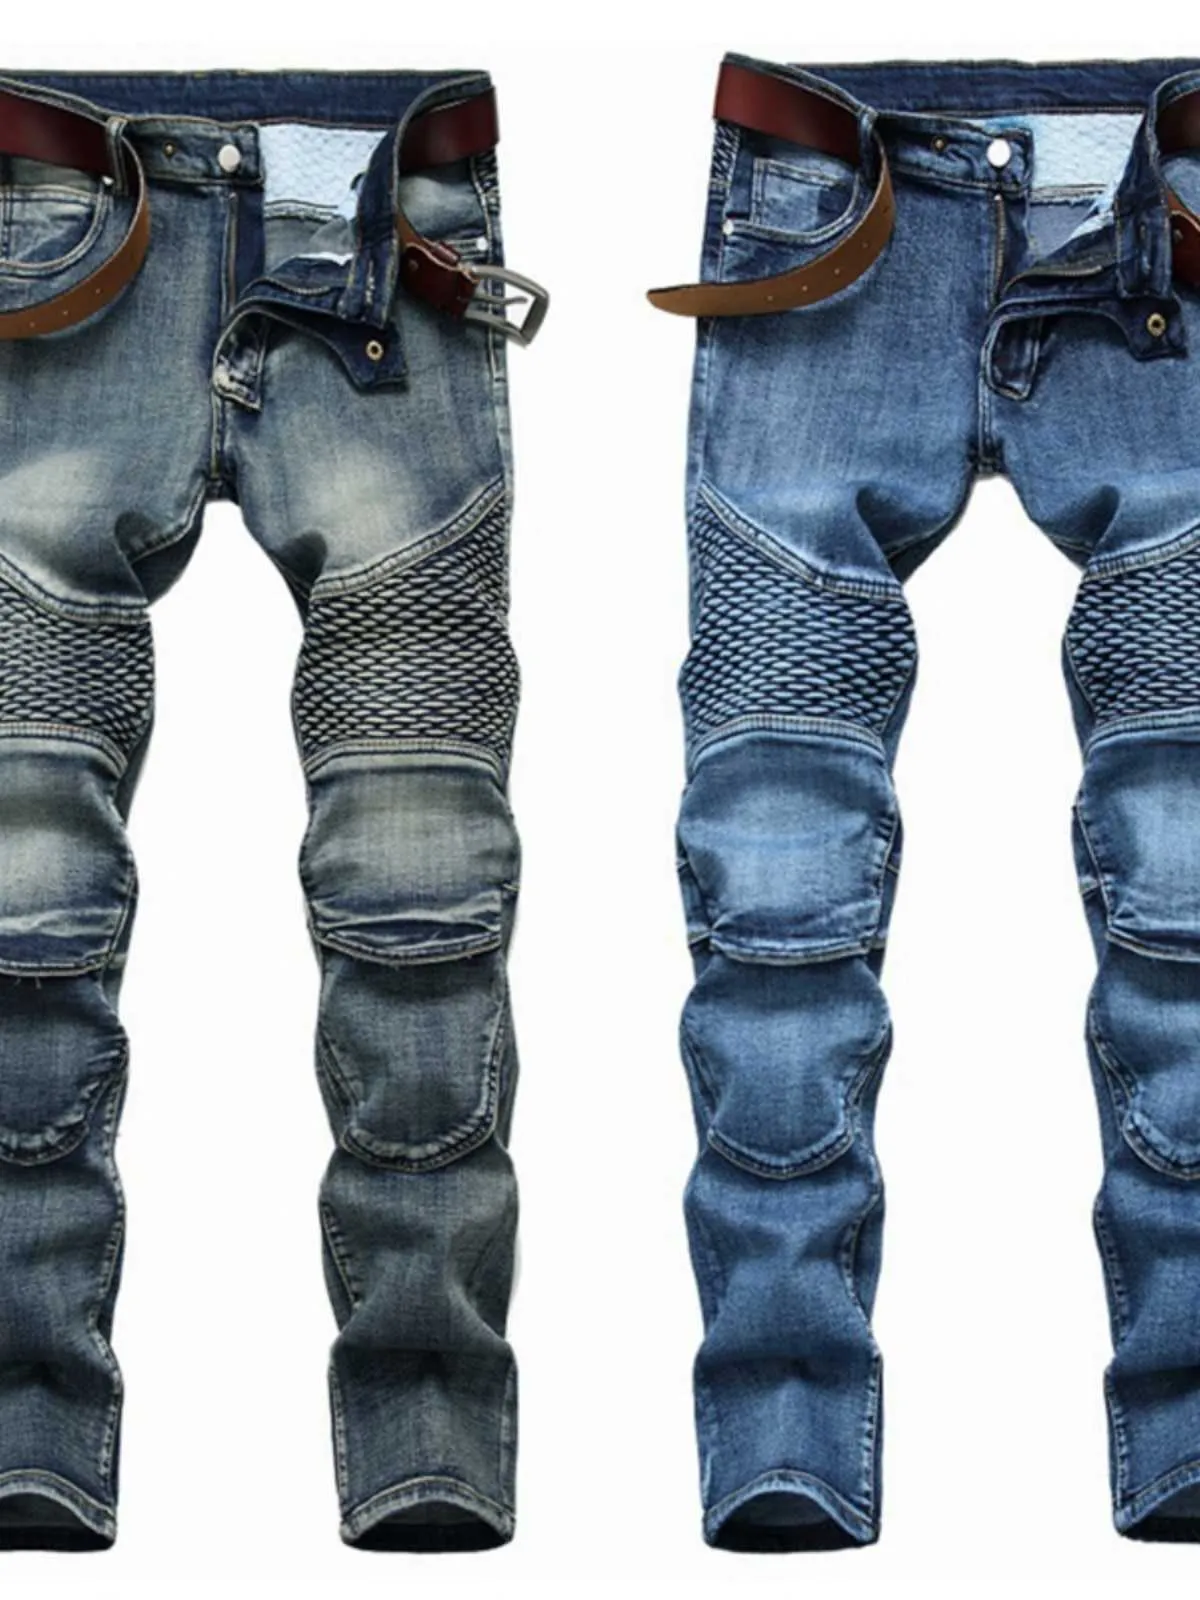 Can fit knee pads motorcycle jeans 3-color motorcycle riding pants mens pleated large size nostalgic pants slim fit pants spring